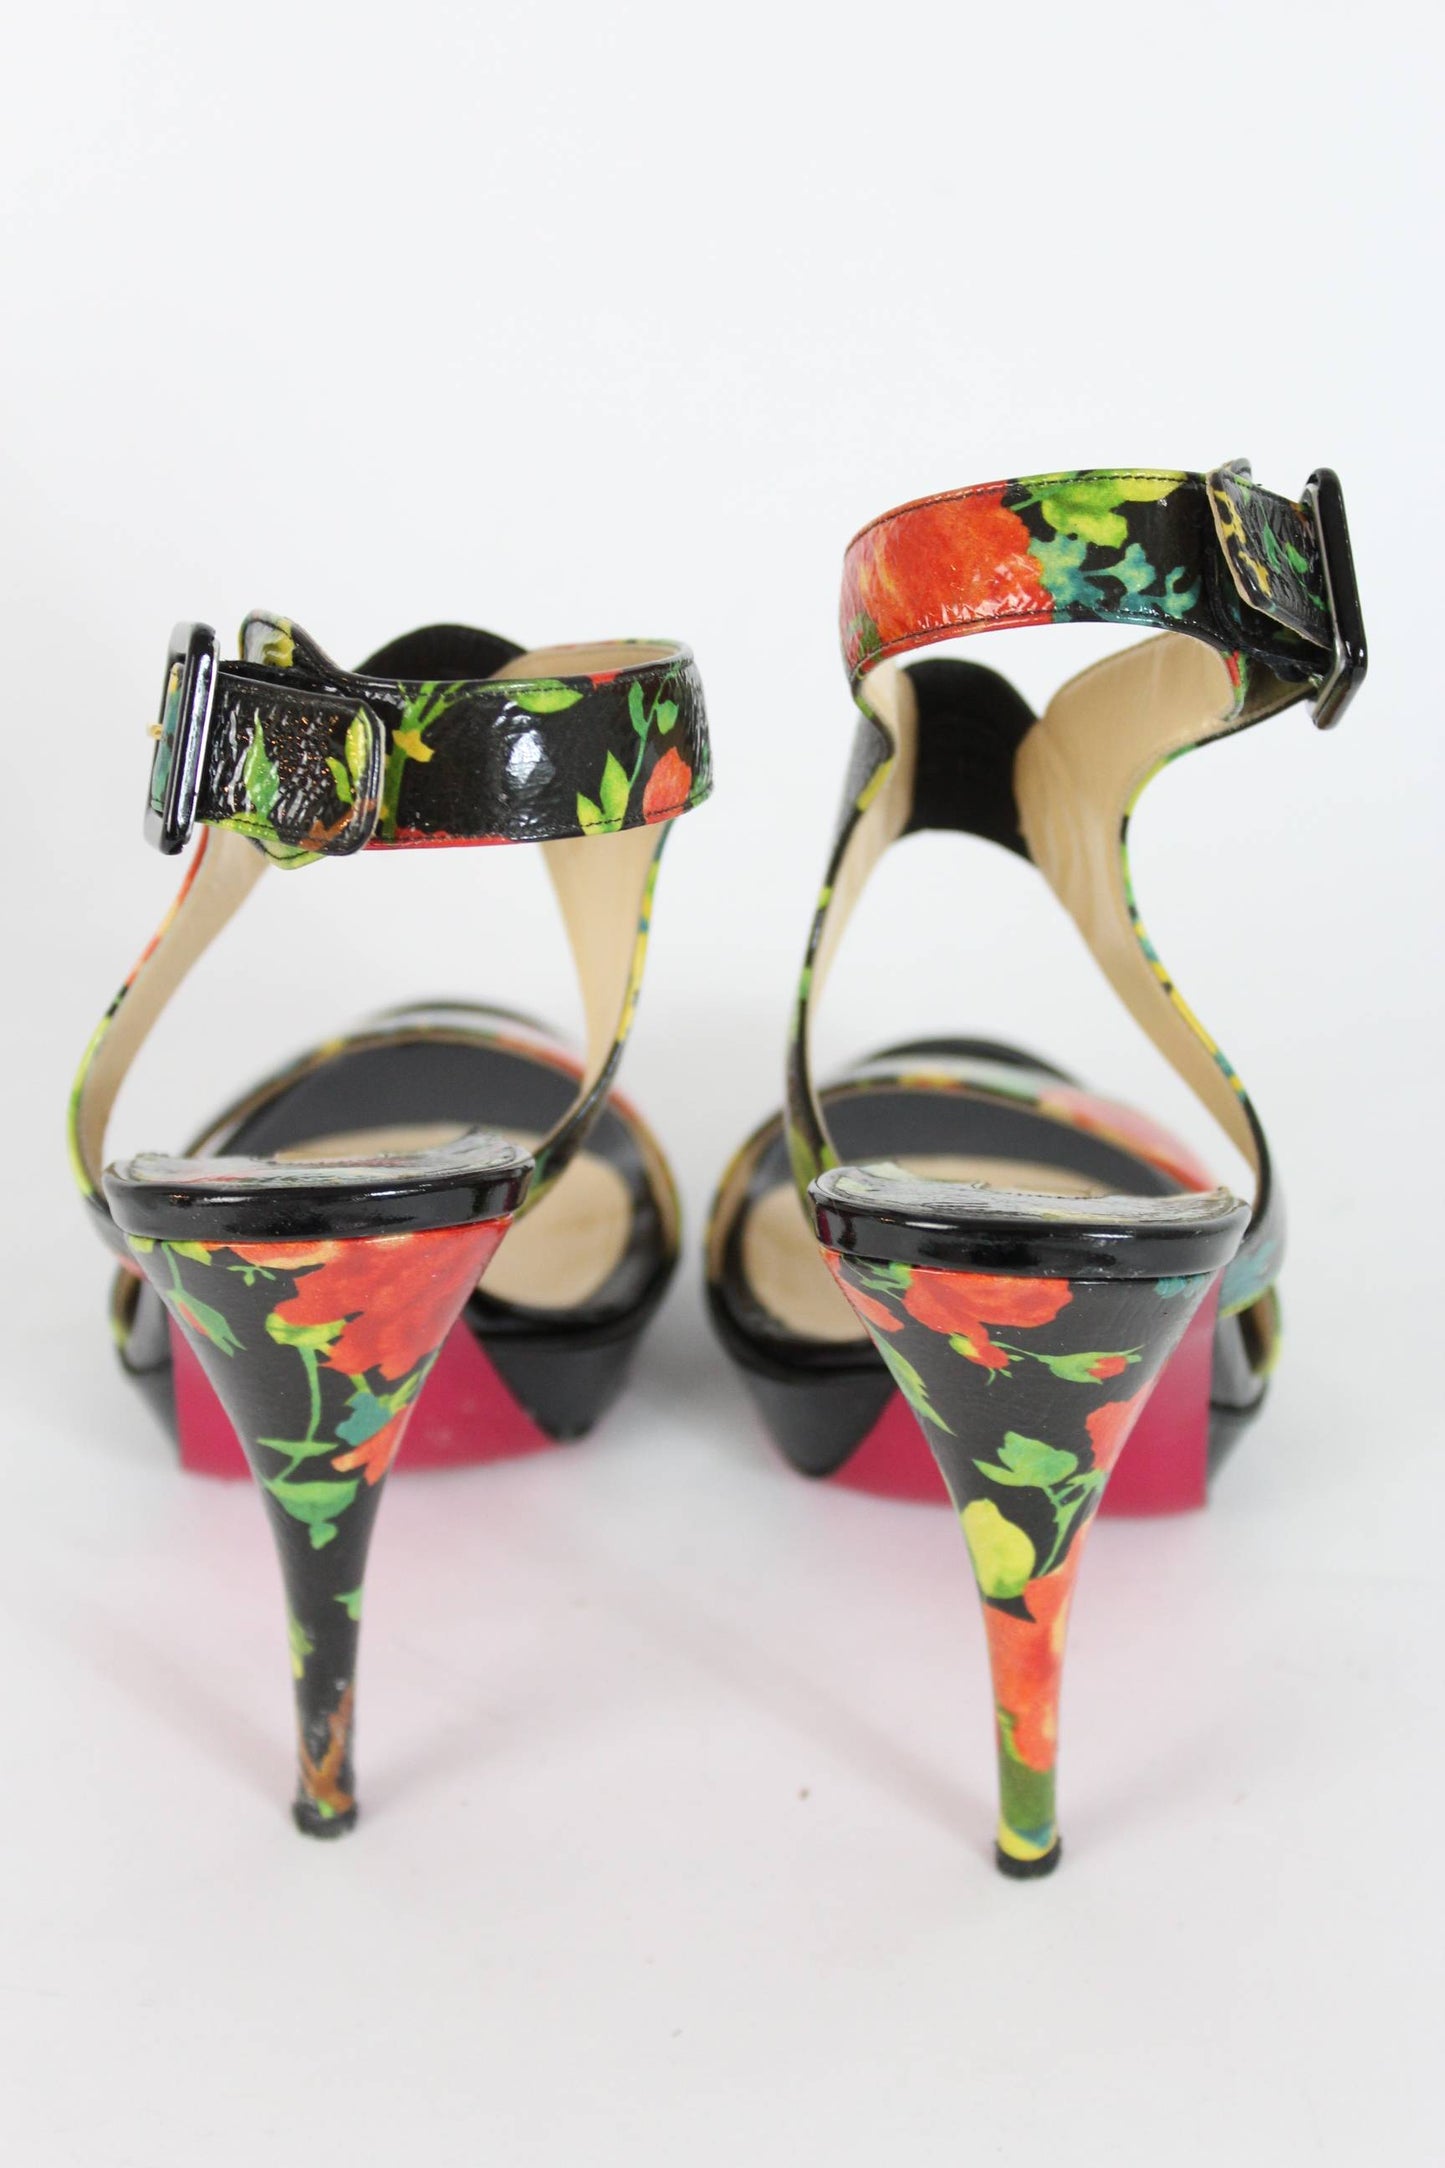 Luciano Padovan Black Leather Floral Heel Shoes